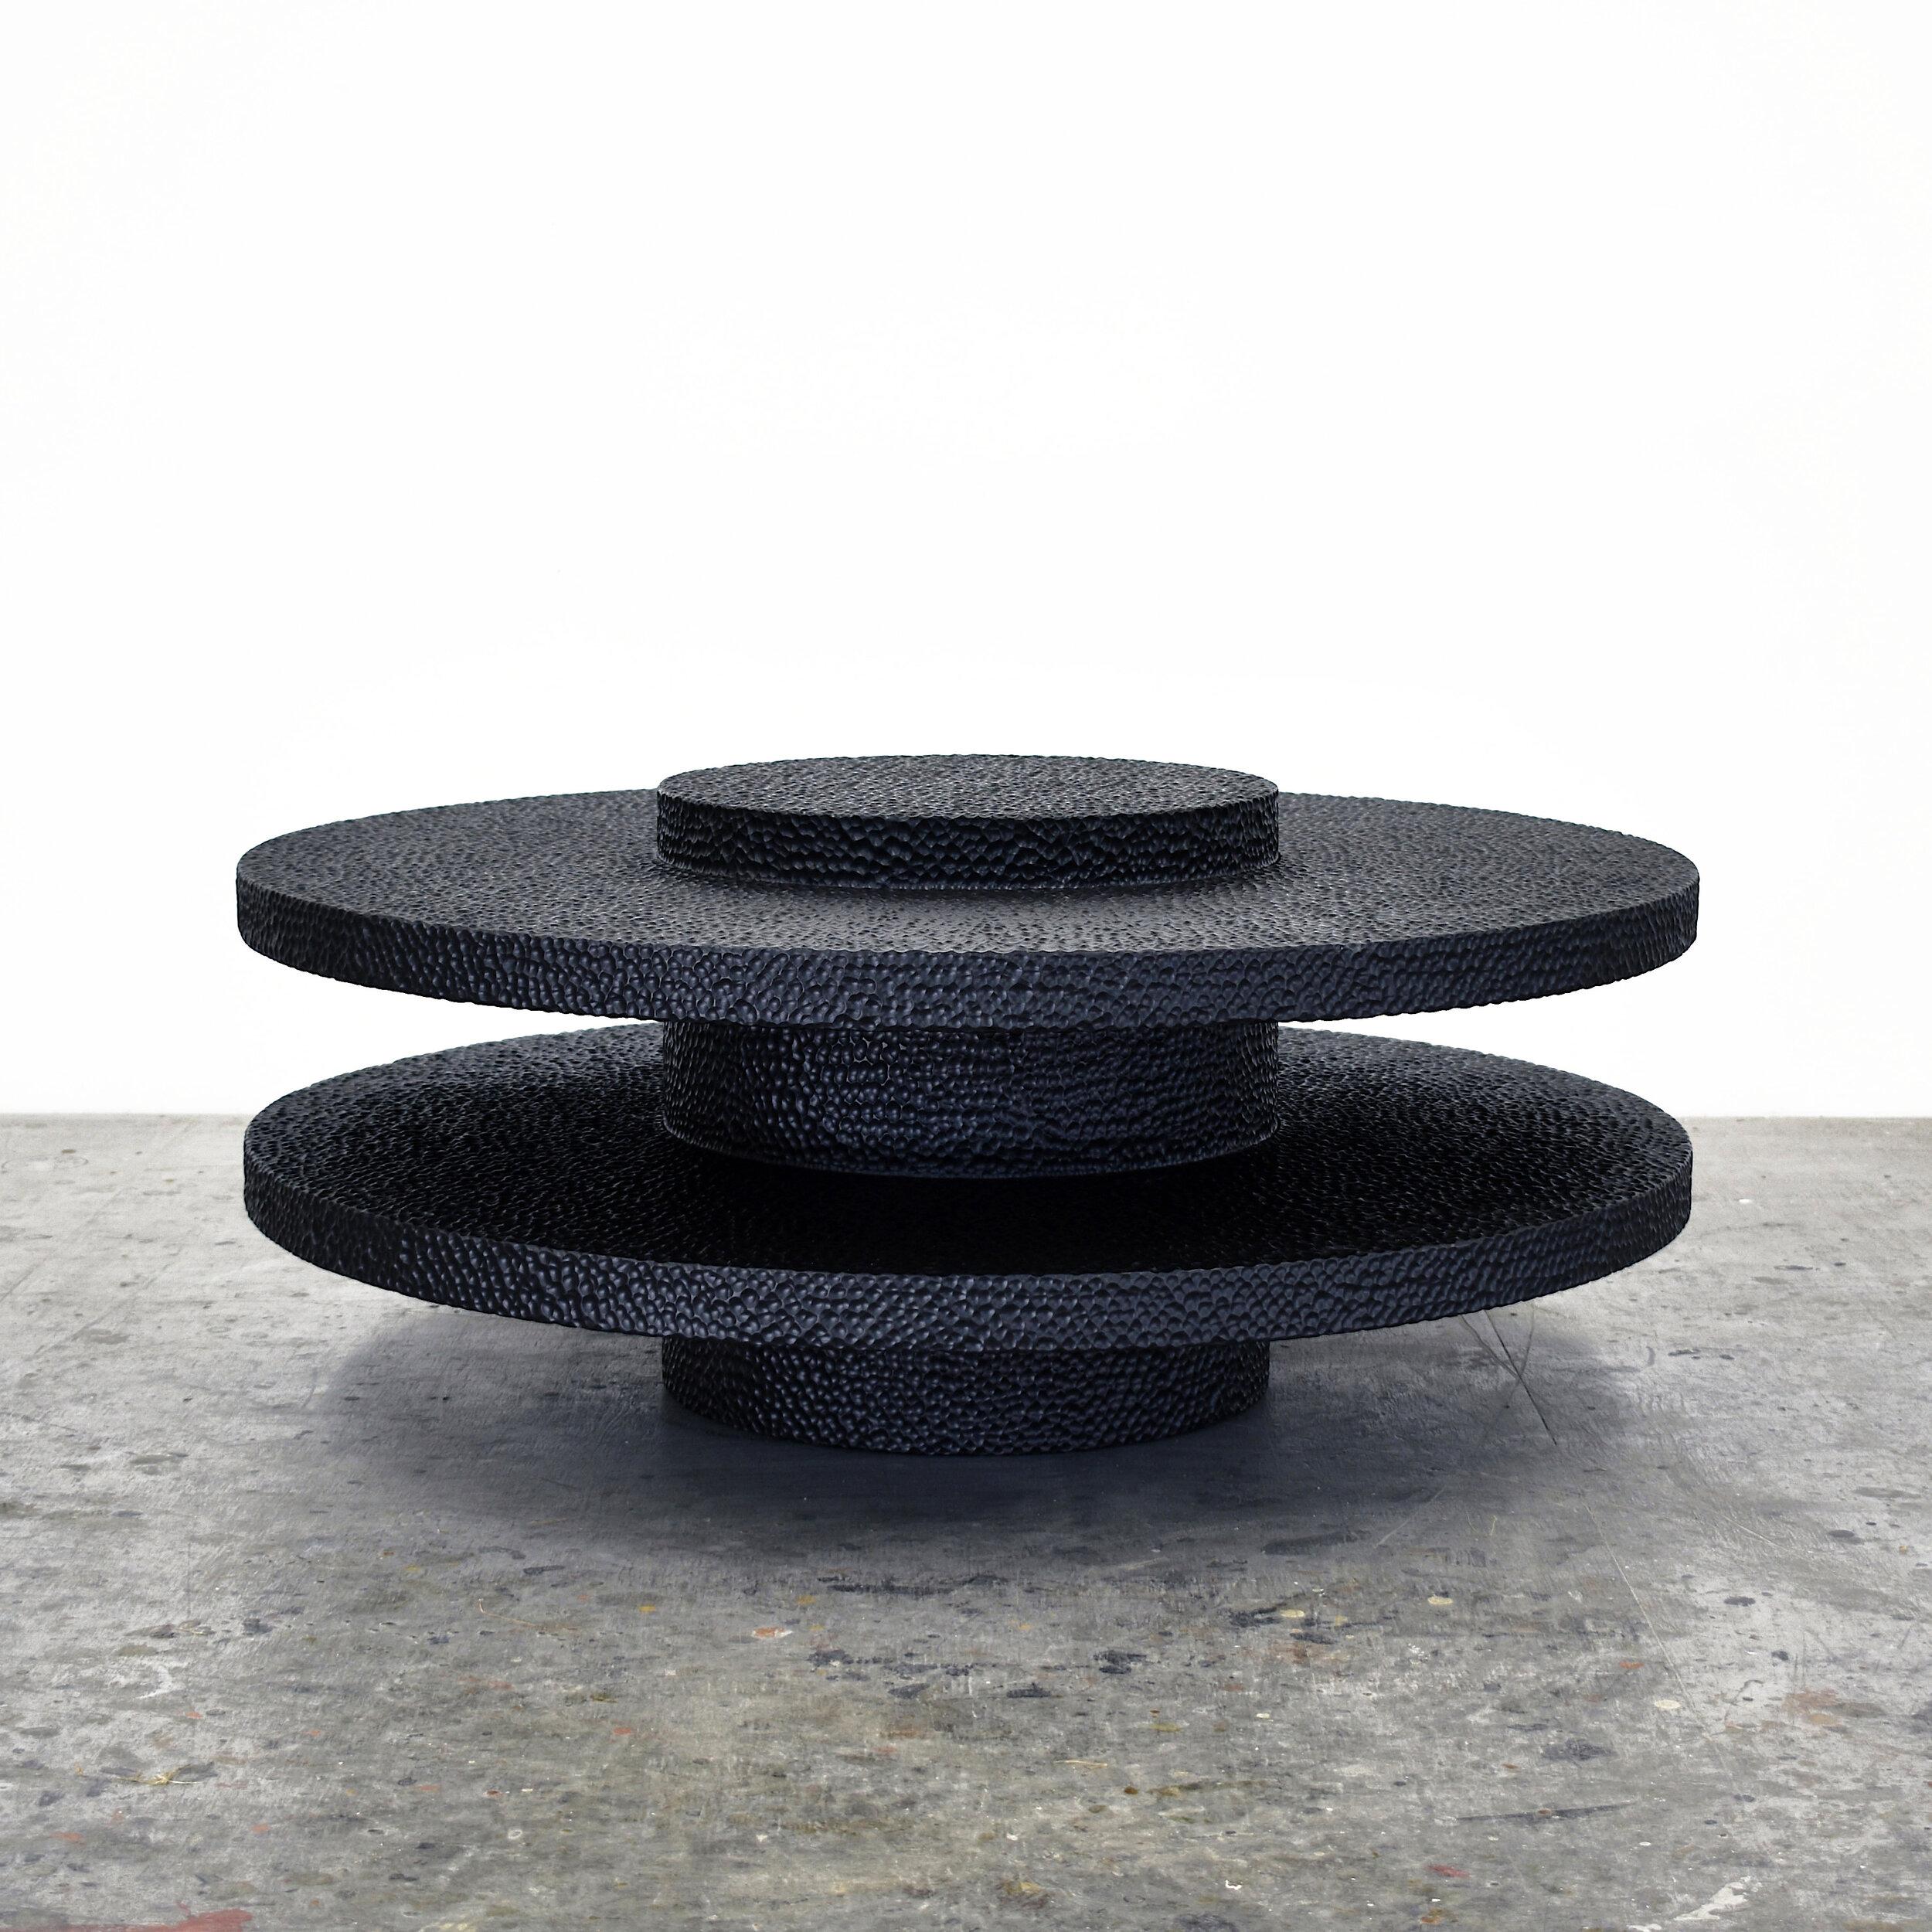 This solid maple table from John Eric Byers merges modern, simplified geometries with traditional craft. The series of stacked circles is painstakingly hand-carved and lacquered with a distinctive textured pattern to give a maximalist finish to a